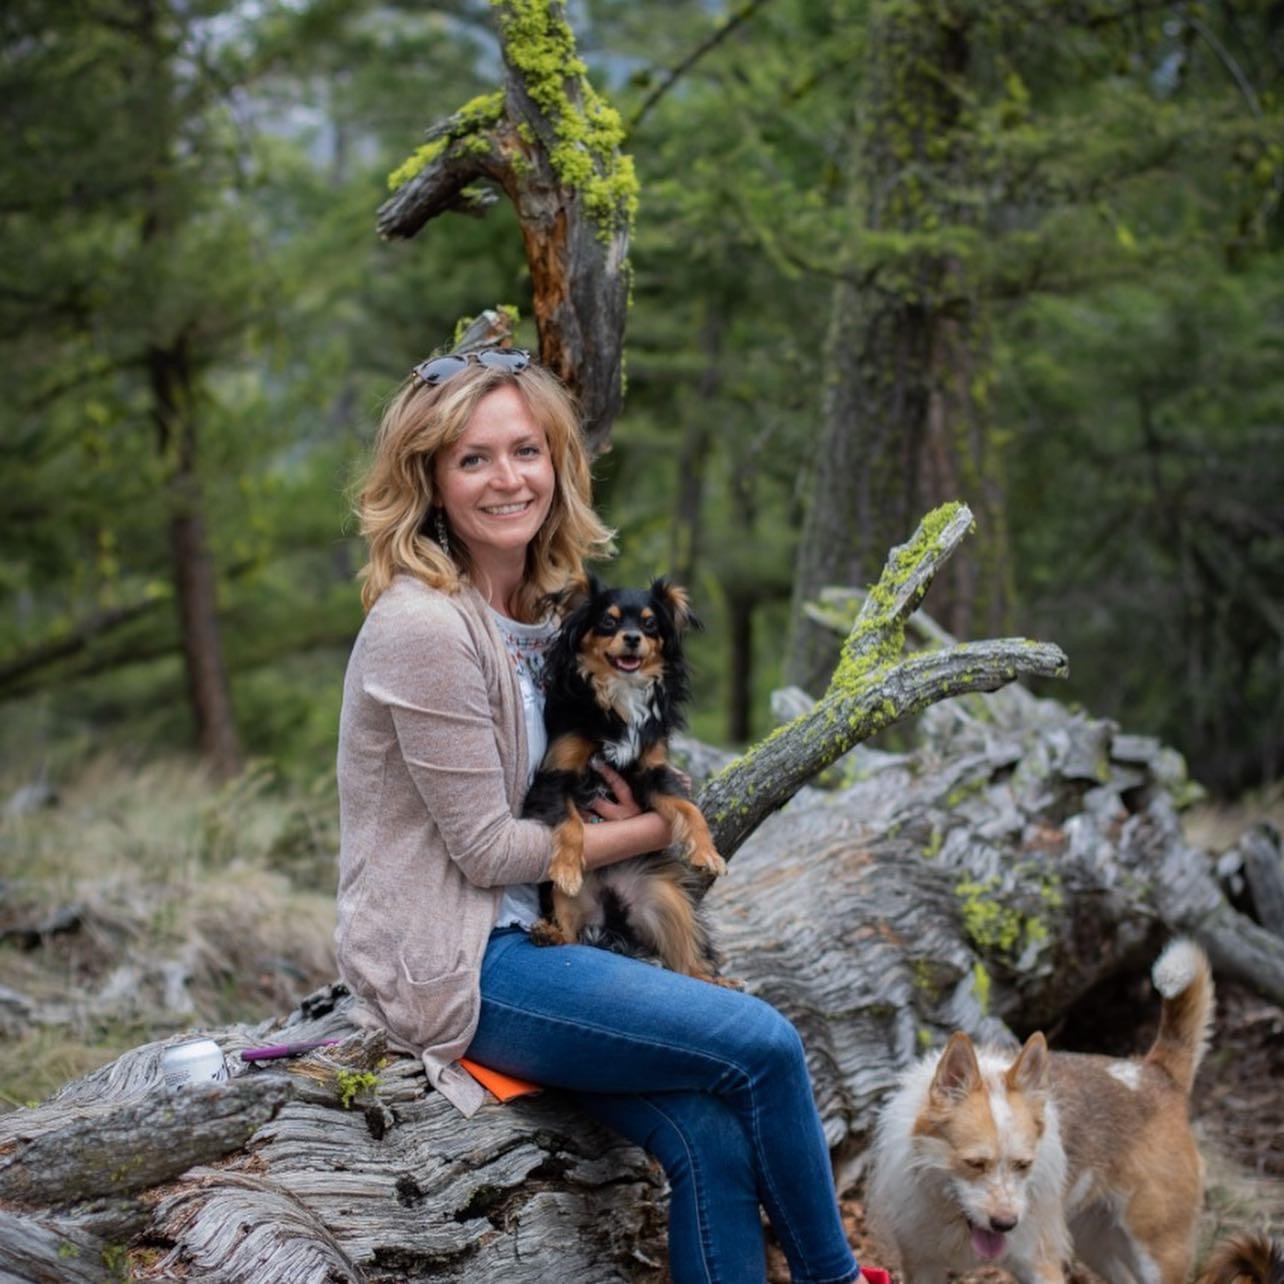 Heather Schwartz, Program Manager sitting on a log in the forest with her dogs